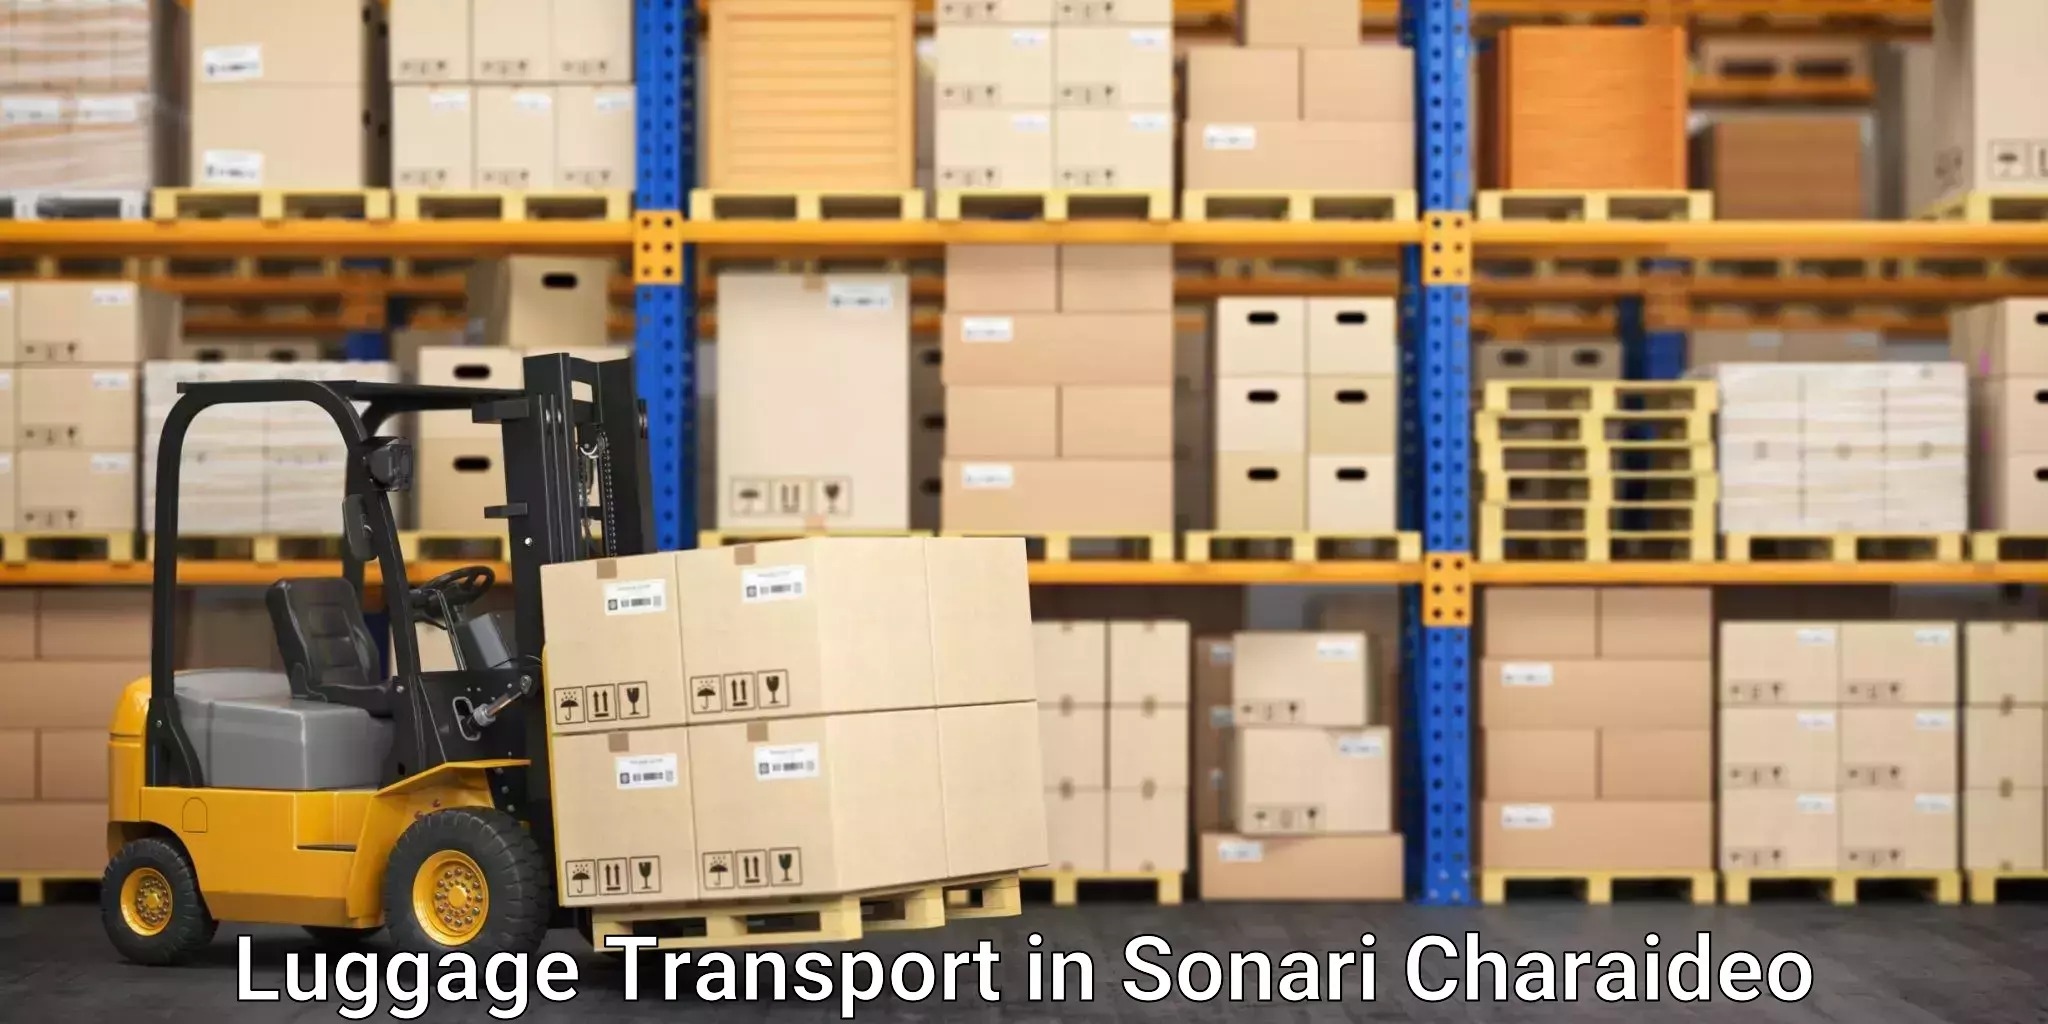 Excess baggage transport in Sonari Charaideo